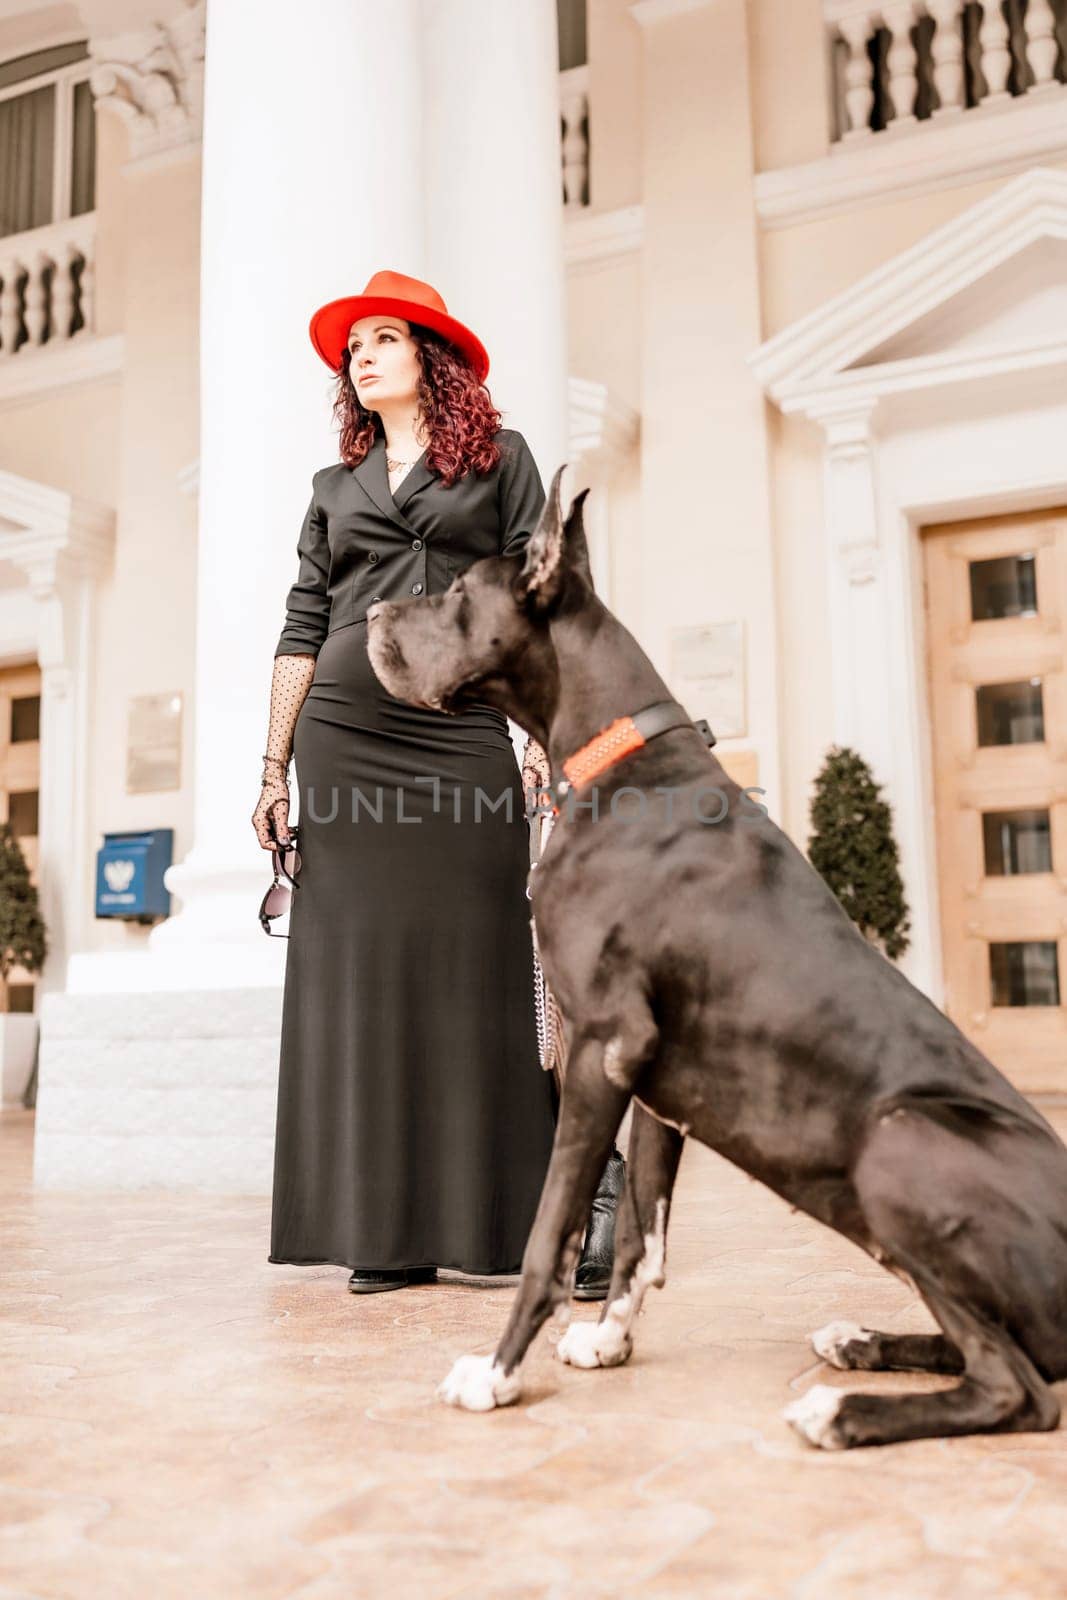 A photo of a woman and her Great Dane walking through a town, taking in the sights and sounds of the urban environment. by Matiunina